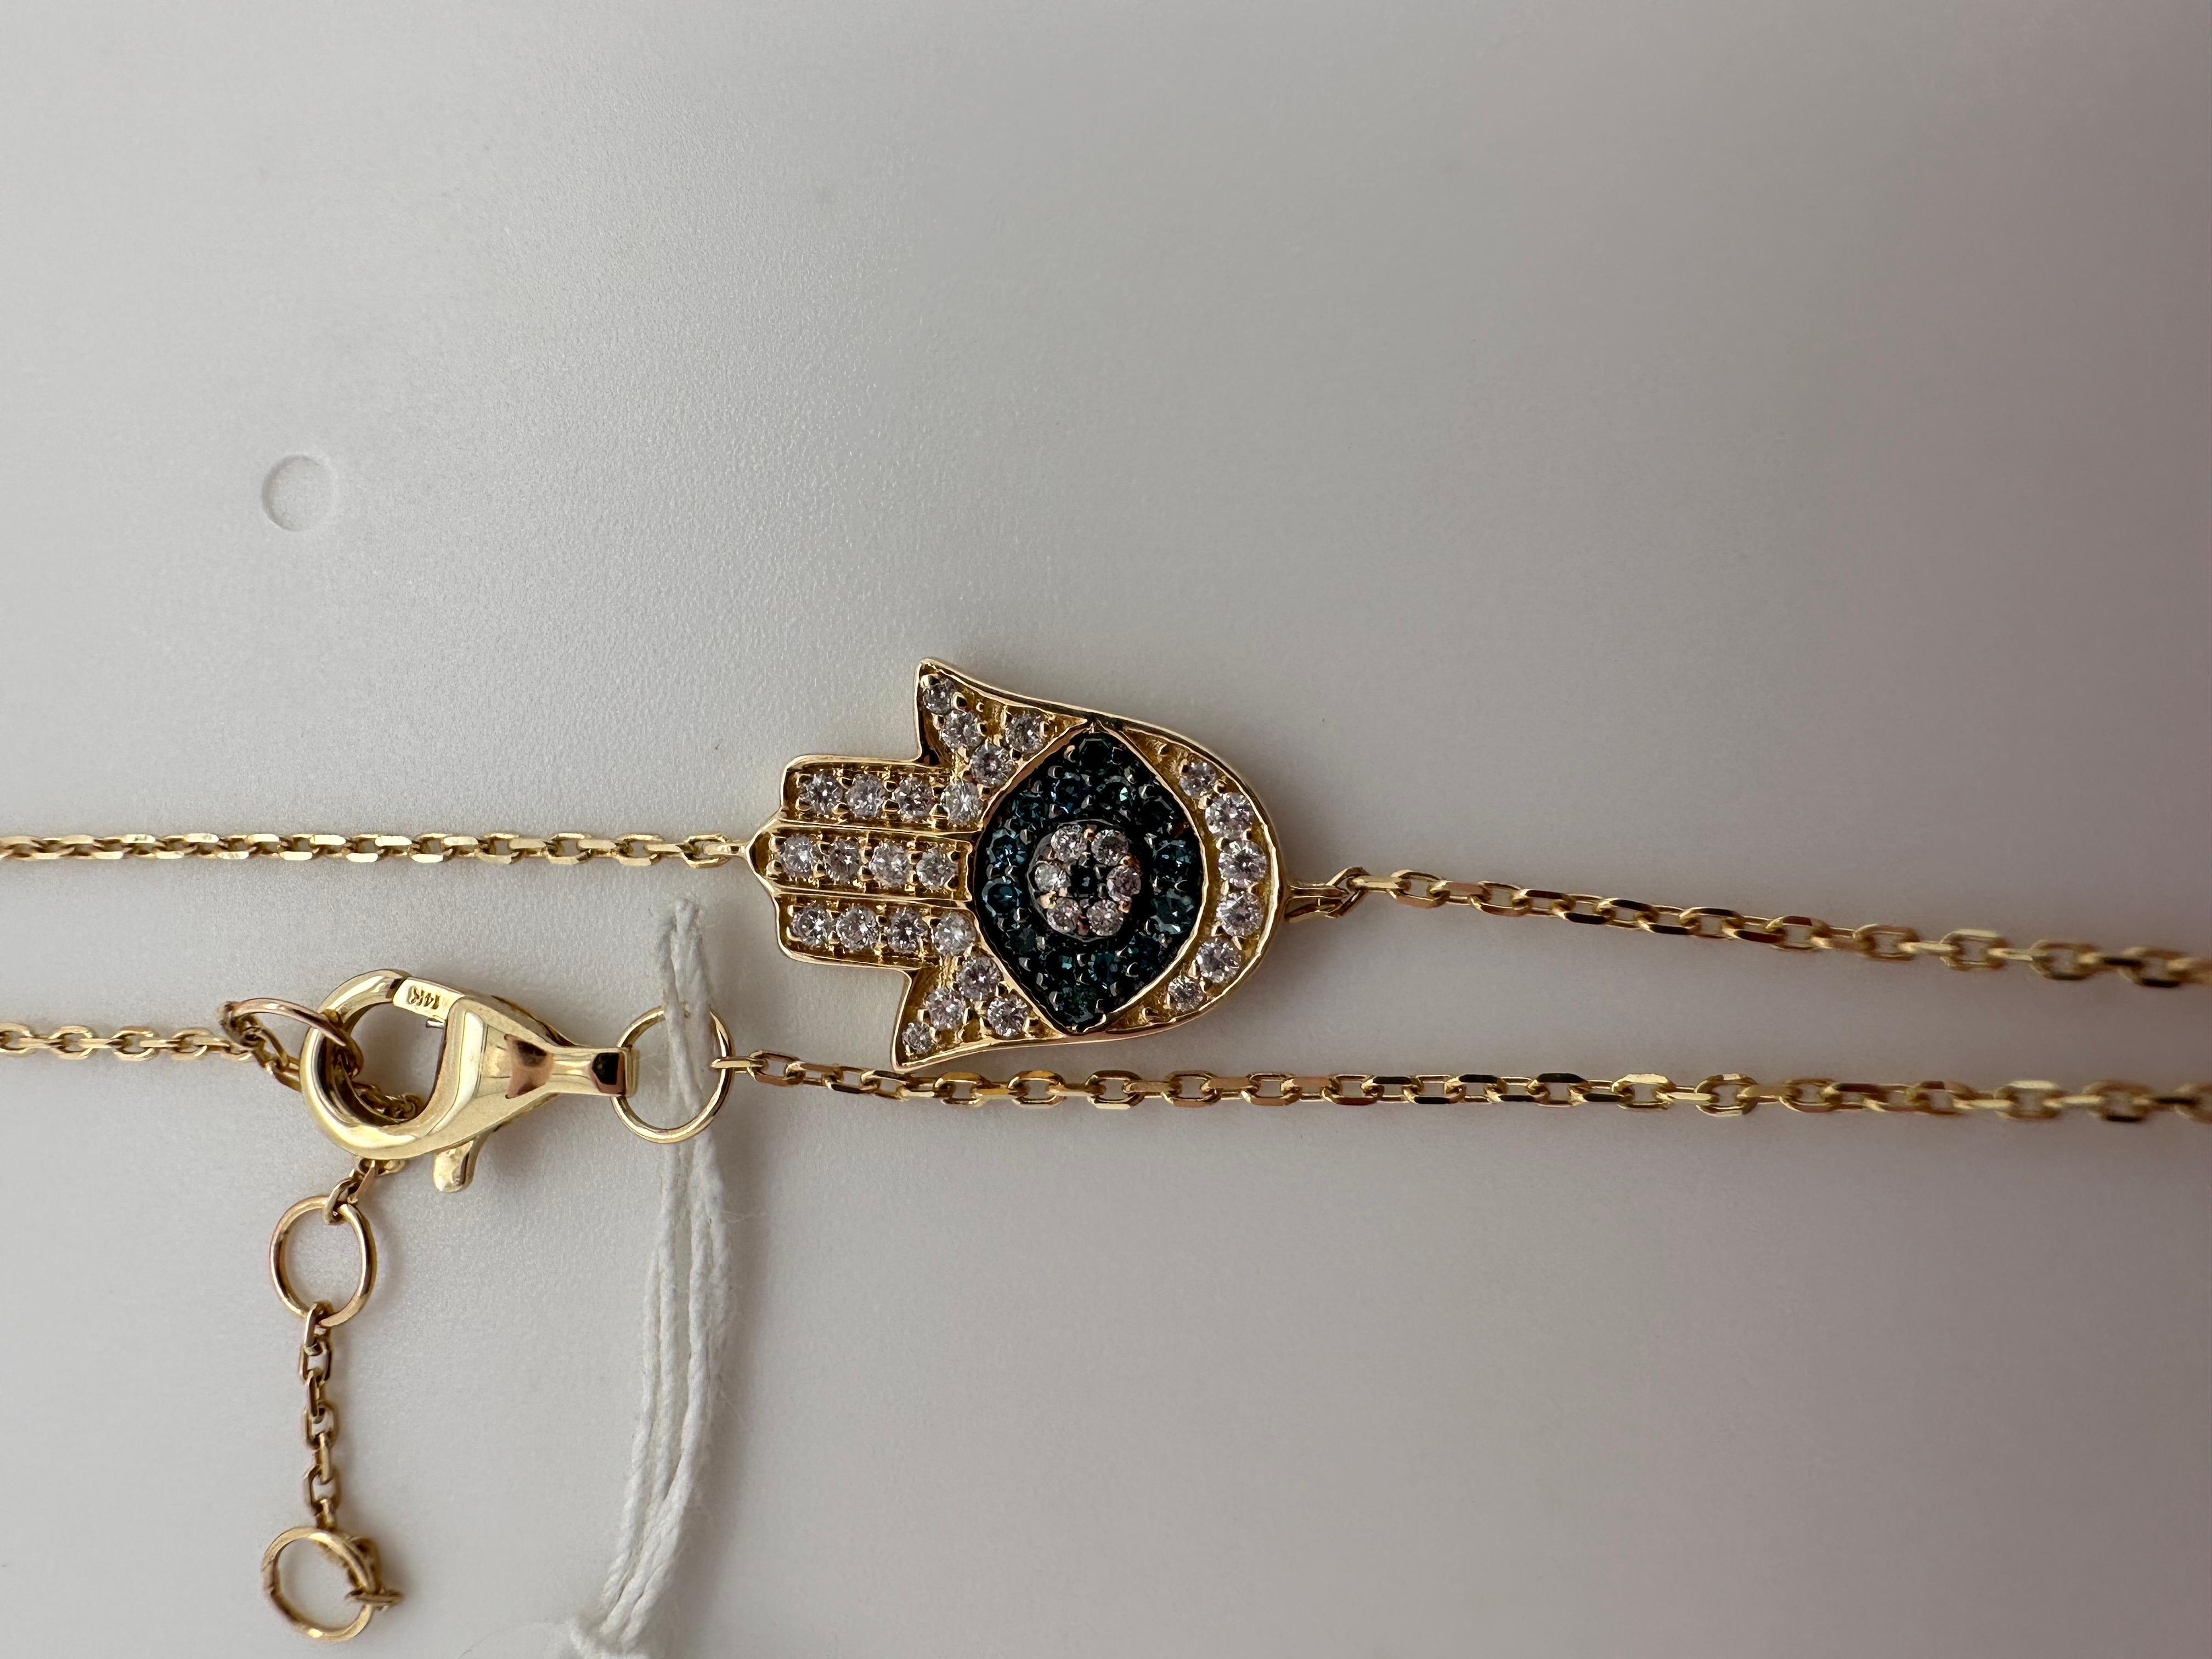 Dainty Evil Eye diamond bracelet in 14KT gold.

Metal Type: 14KT
Natural Diamond(s): 
Color: G
Cut:Round Brilliant
Carat: 0.20ct
Clarity: SI (average)
Item: T1200
Certificate of authenticity comes with purchase

ABOUT US
We are a family-owned